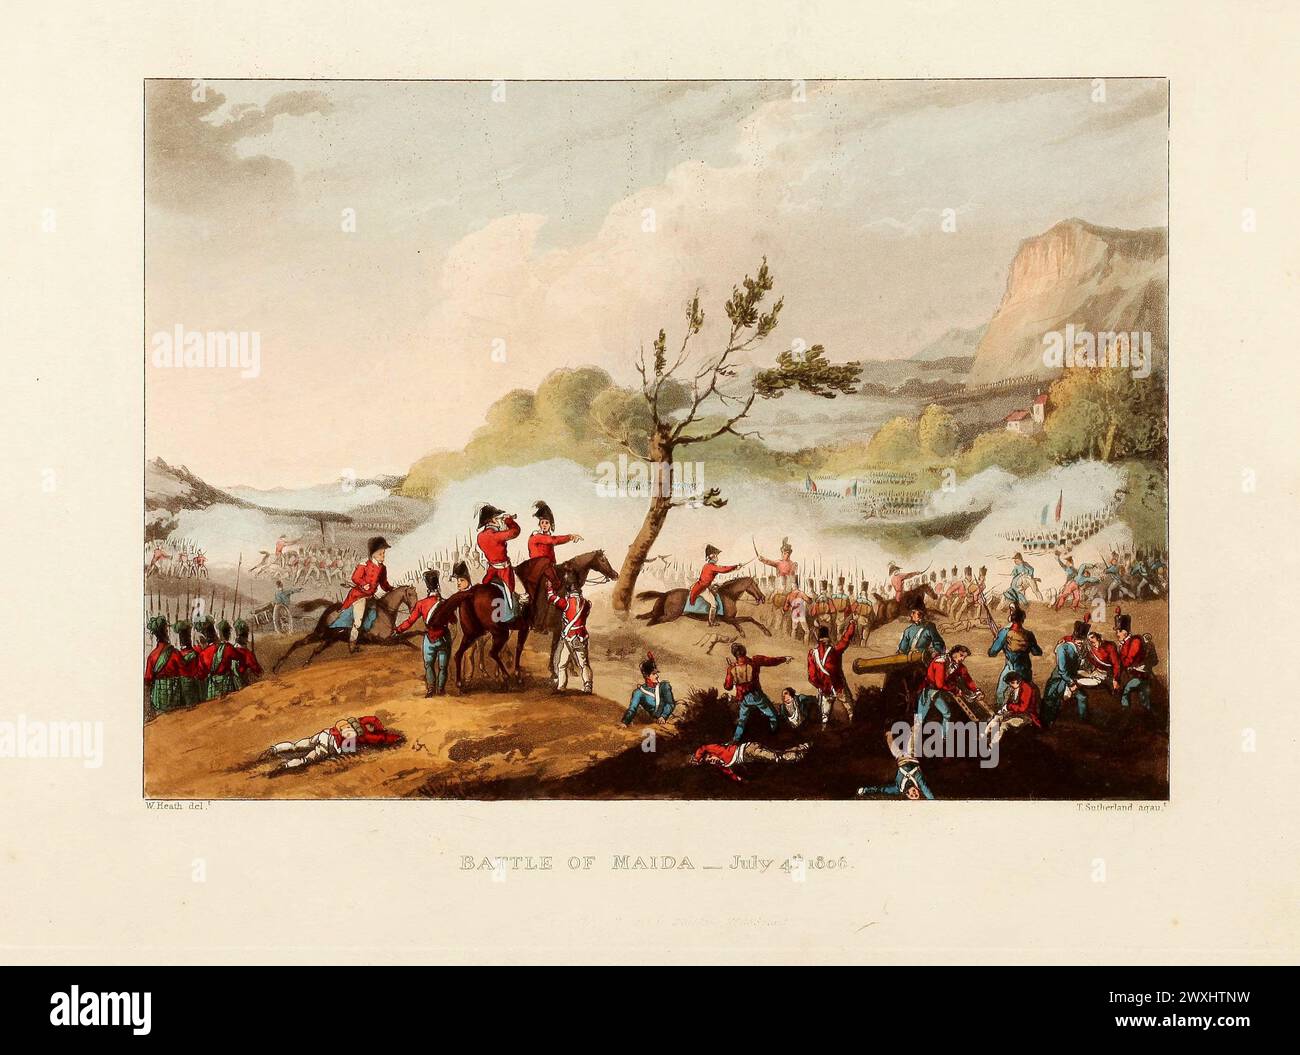 Battle of Maida, July 4th 1806. Vintage Coloured Aquatint, published by James Jenkins, 1815,  from  The martial achievements of Great Britain and her allies : from 1799 to 1815. Stock Photo